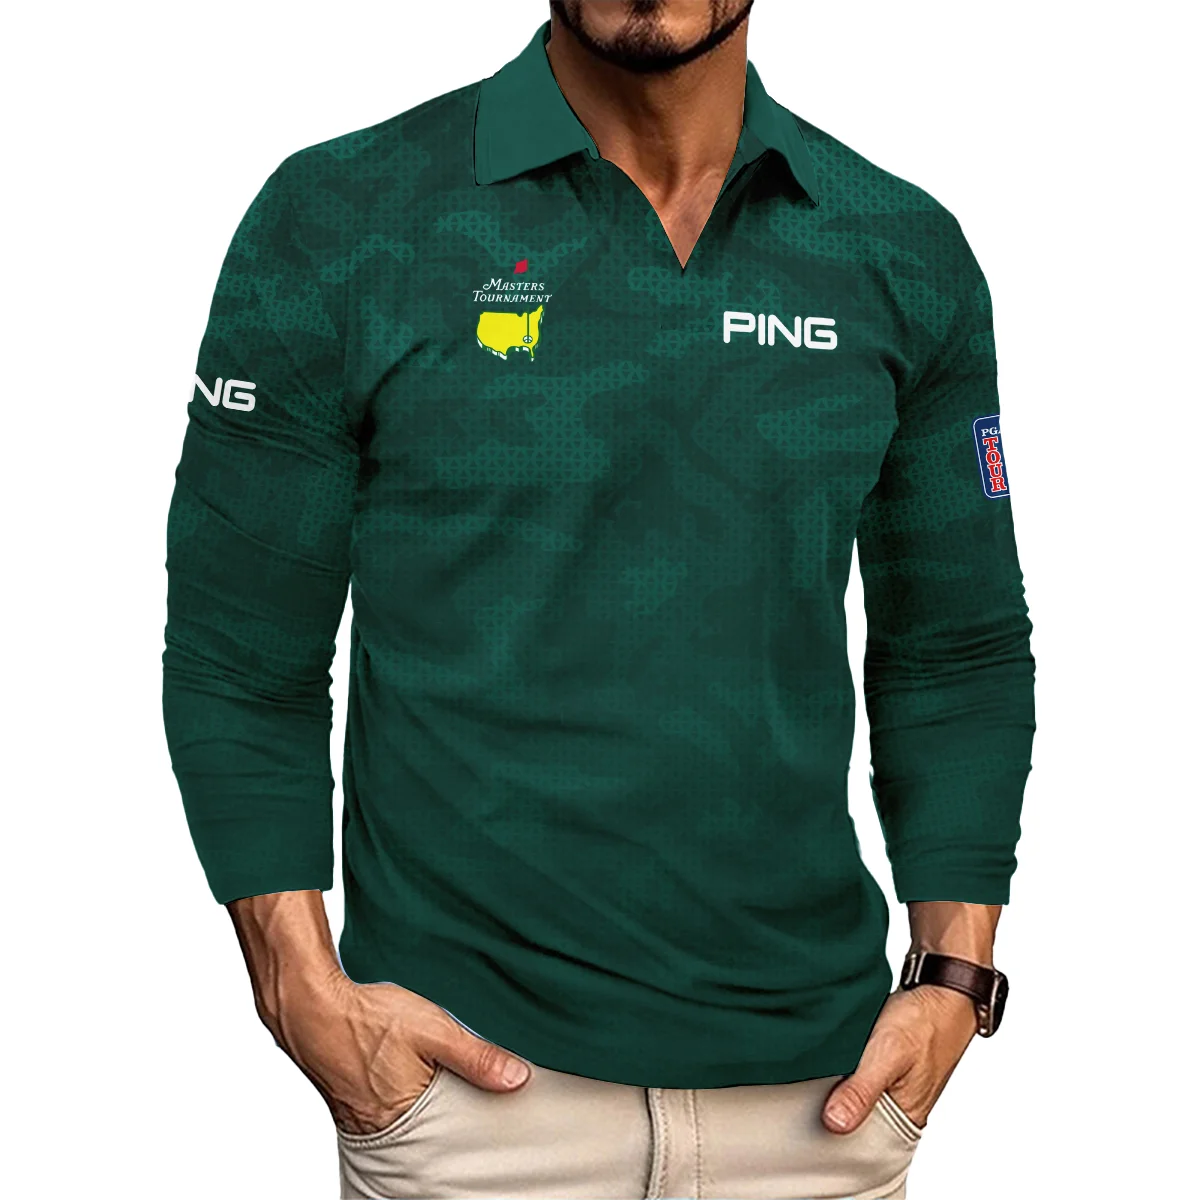 Masters Tournament Ping Camo Sport Green Abstract Vneck Long Polo Shirt Style Classic Long Polo Shirt For Men